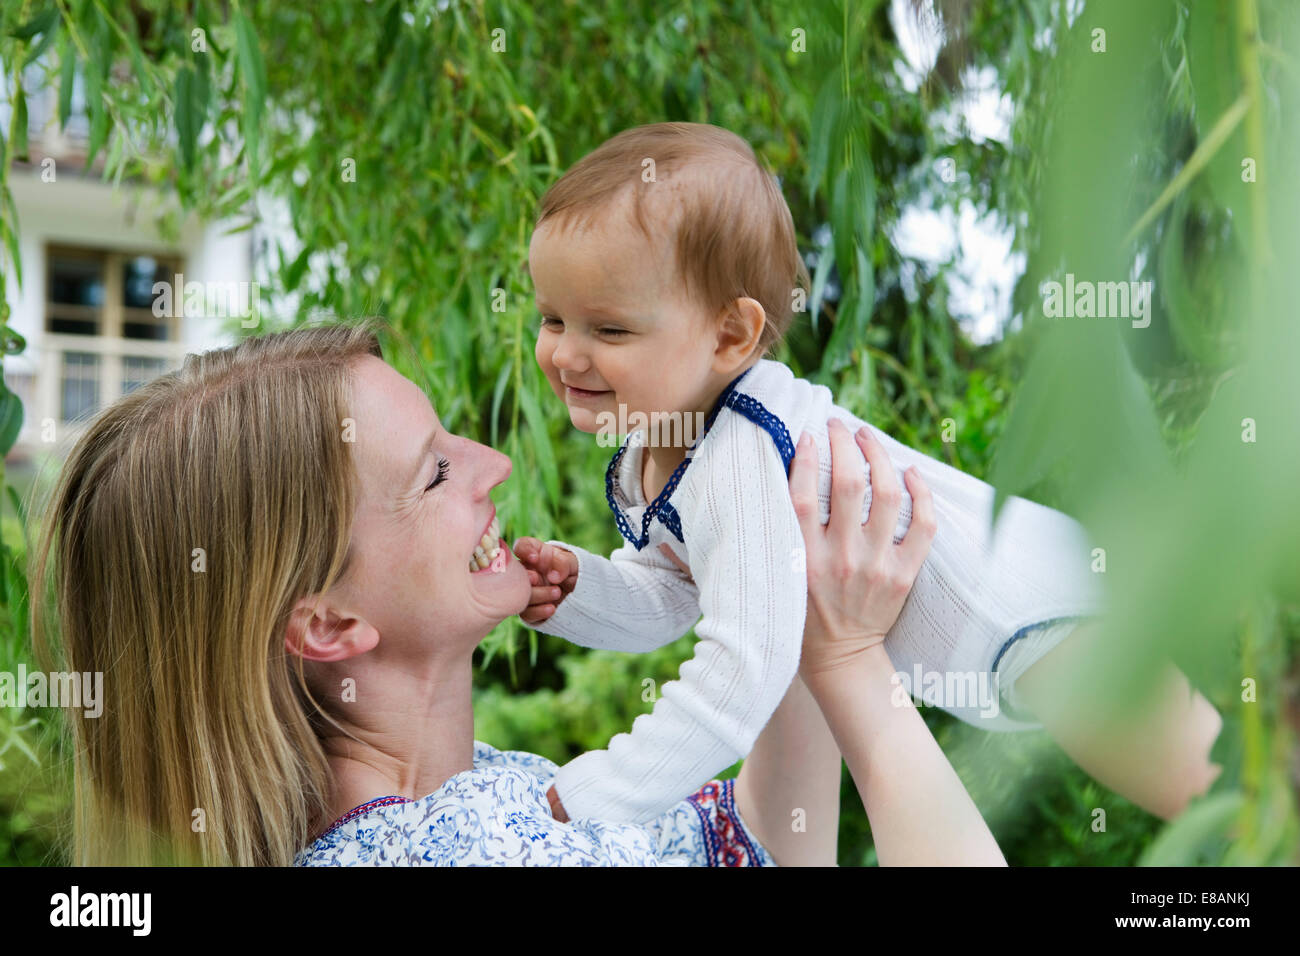 Mother holding up baby daughter face to face in garden Stock Photo